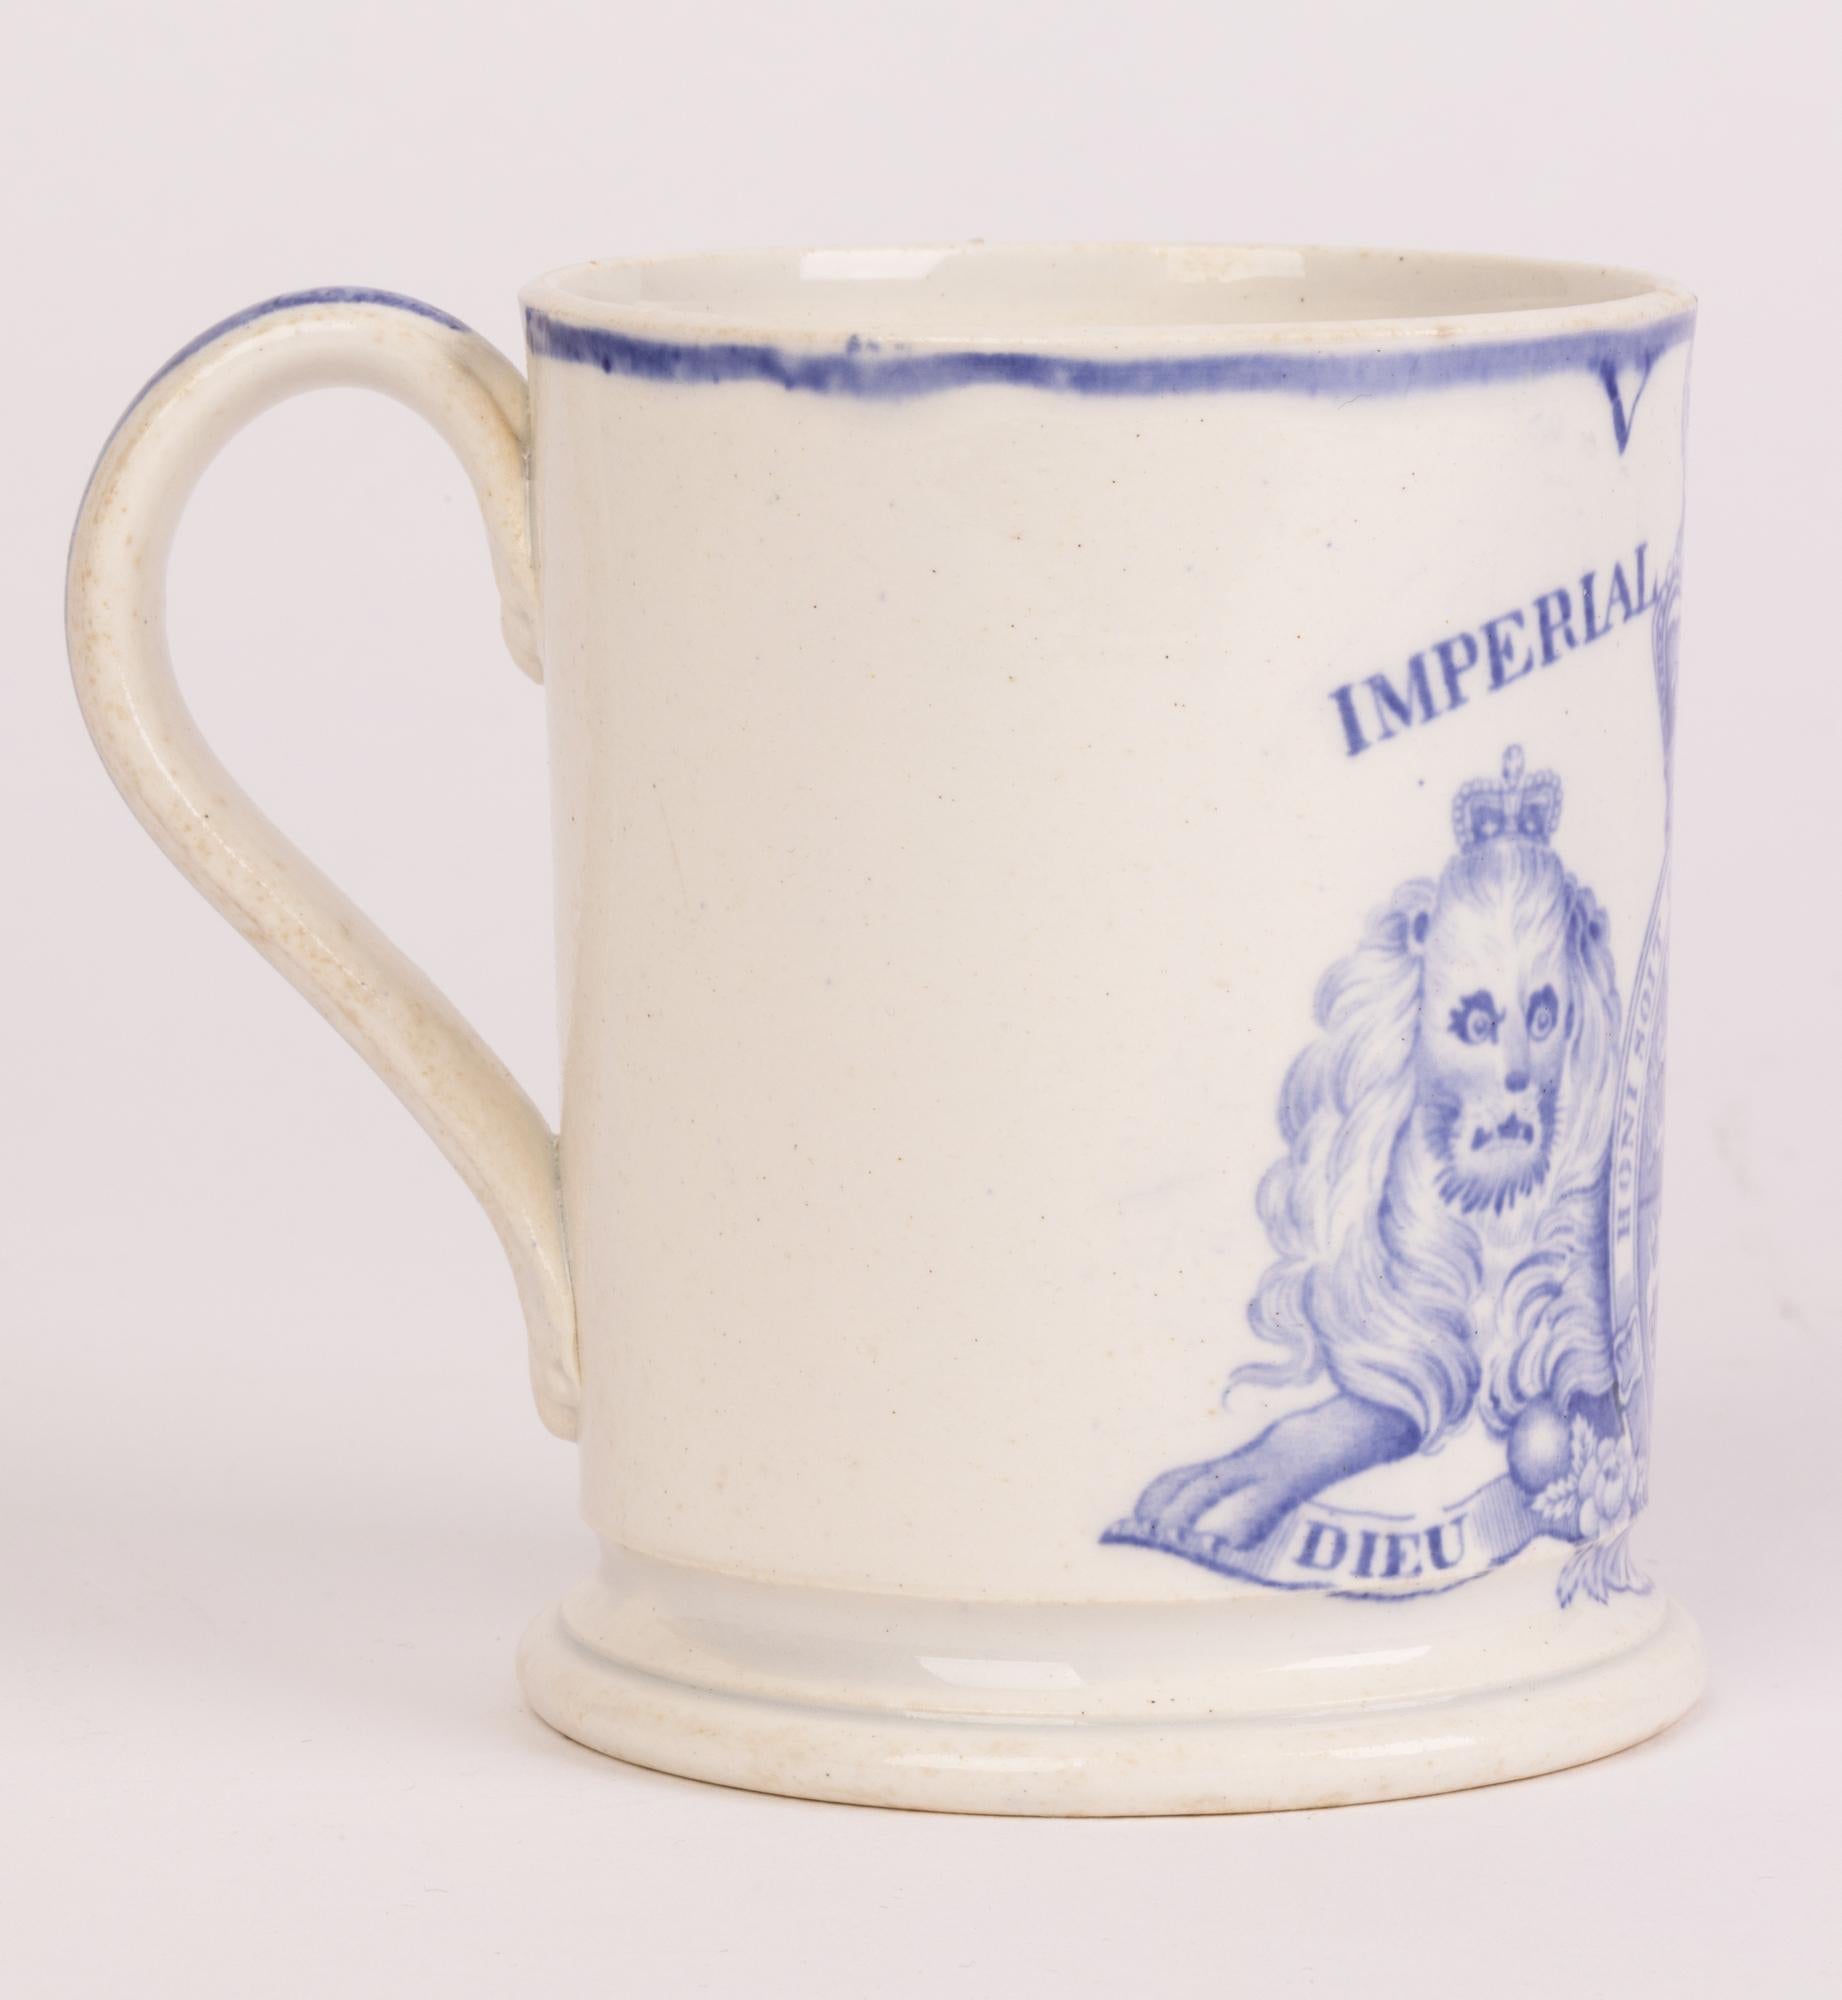 Davenport Rare Early Victorian Imperial Measure Printed Pottery Mug  3